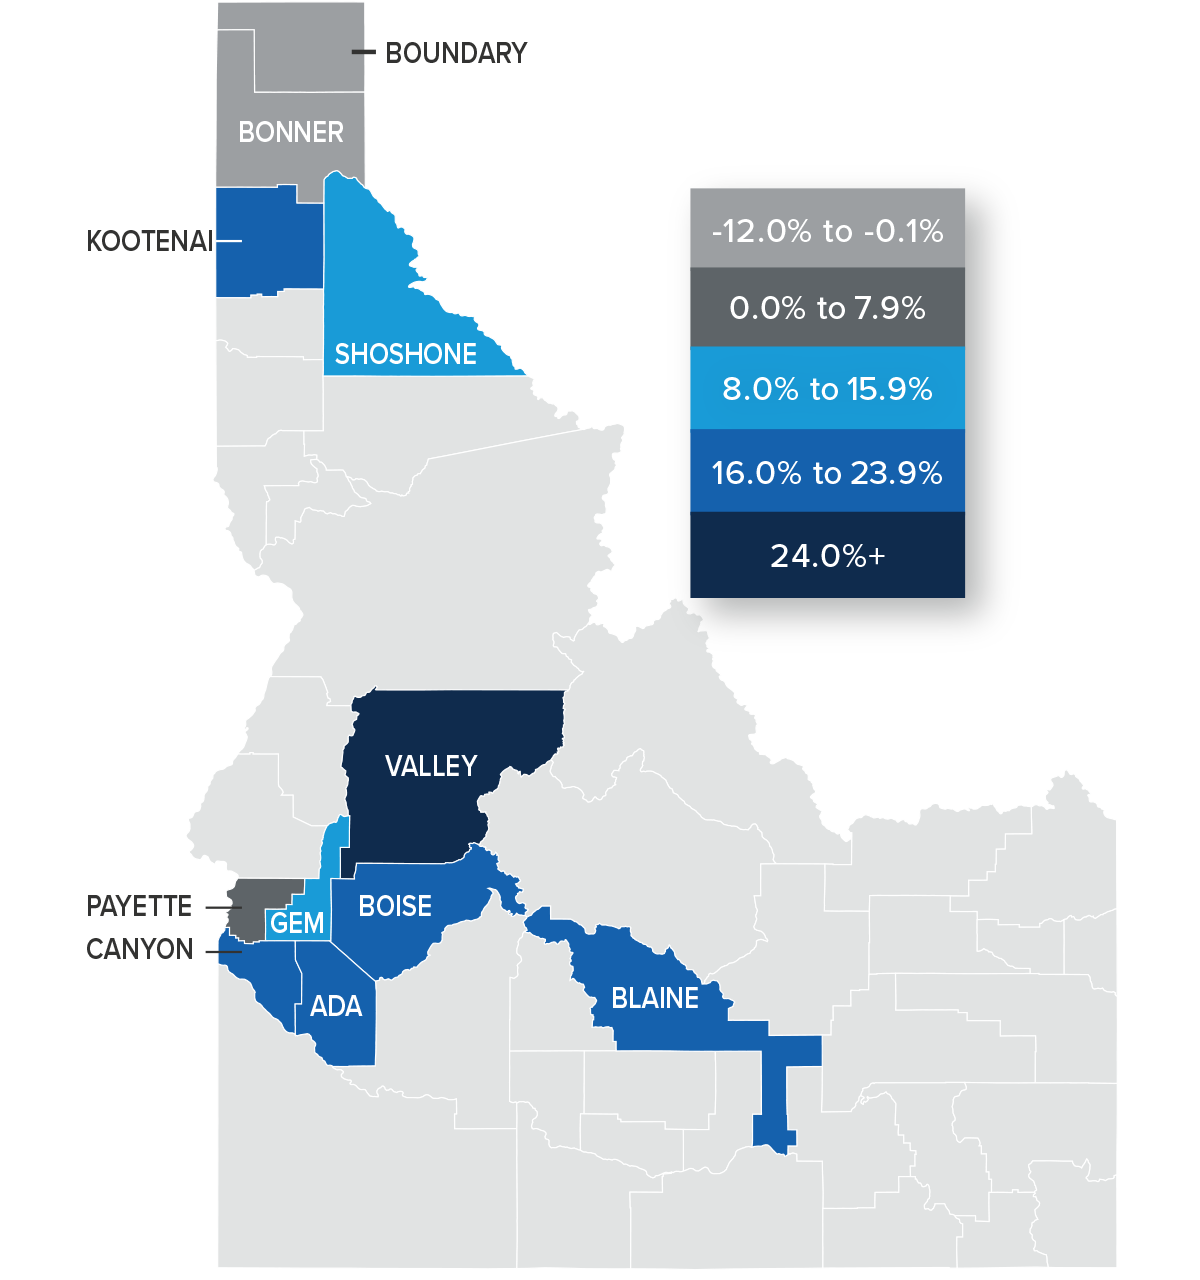 A map showing the real estate home prices percentage changes for various counties in Idaho. Different colors correspond to different tiers of percentage change. Bonner and Boundary Counties were in the -12% to -0.1% change range. Payette County was the only county with a percentage change in the 0% to 7.9% range, while Shoshone and Gem are in the 8% to 15.9% change range. Kootenai, Blaine, Boise, and Ada Counties are in the 16% to 23.9% change range, and Valley County is the only county in the 24%+ change range.